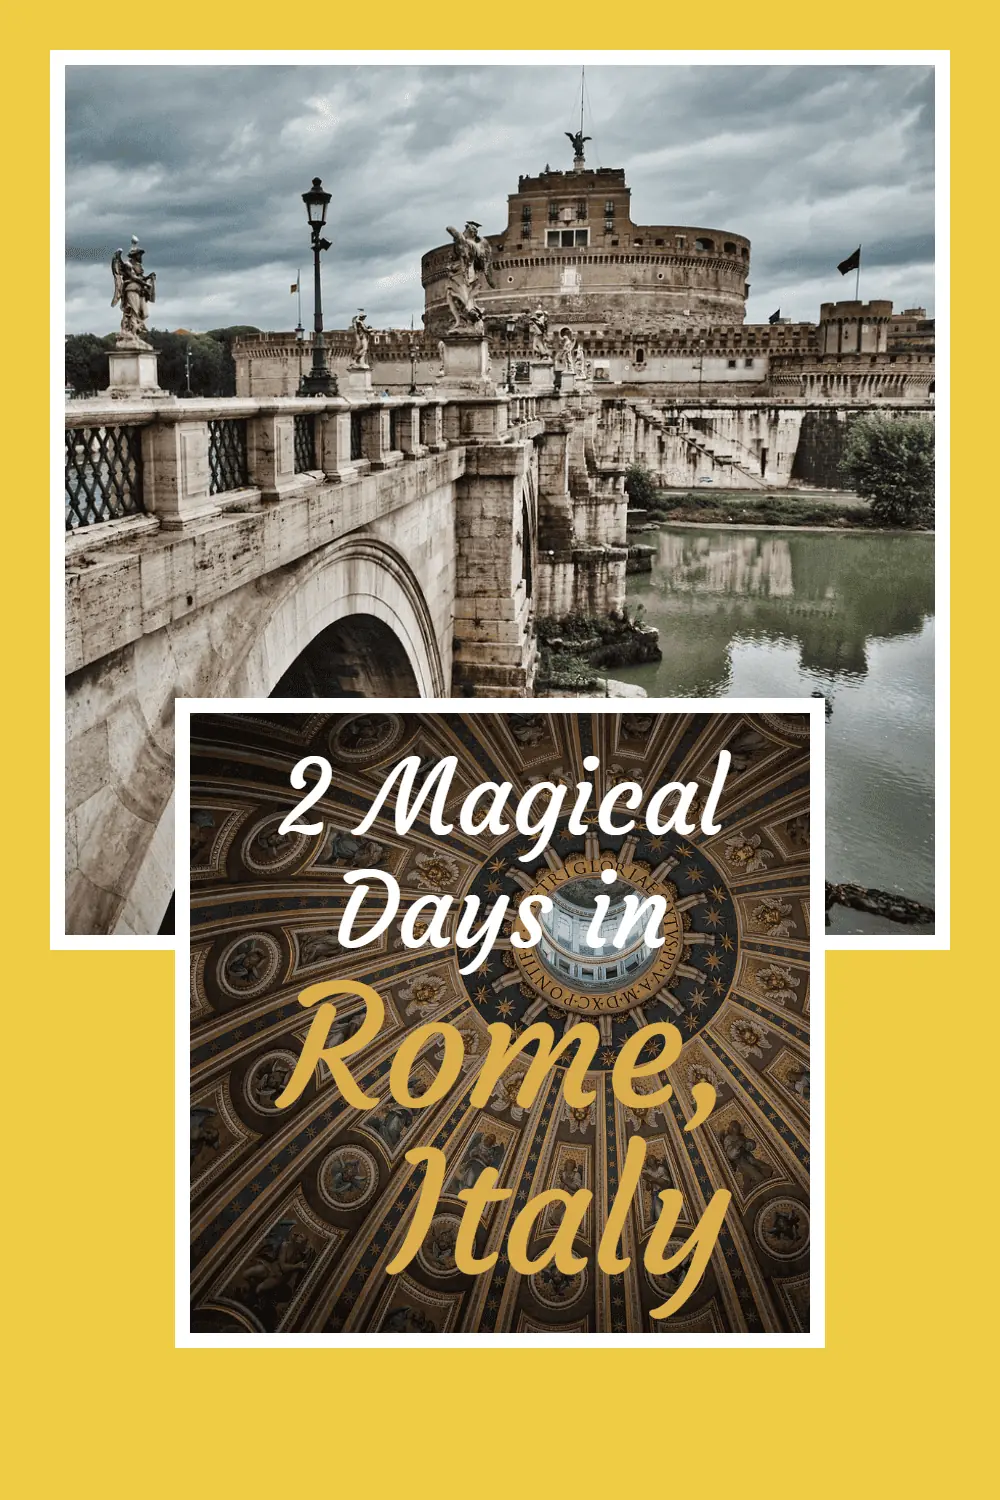 Plan your trip to Rome, Italy with my guide written from my multiple visits to this vibrant city with delights around every corner. #RomeItaly #RomeItinerary